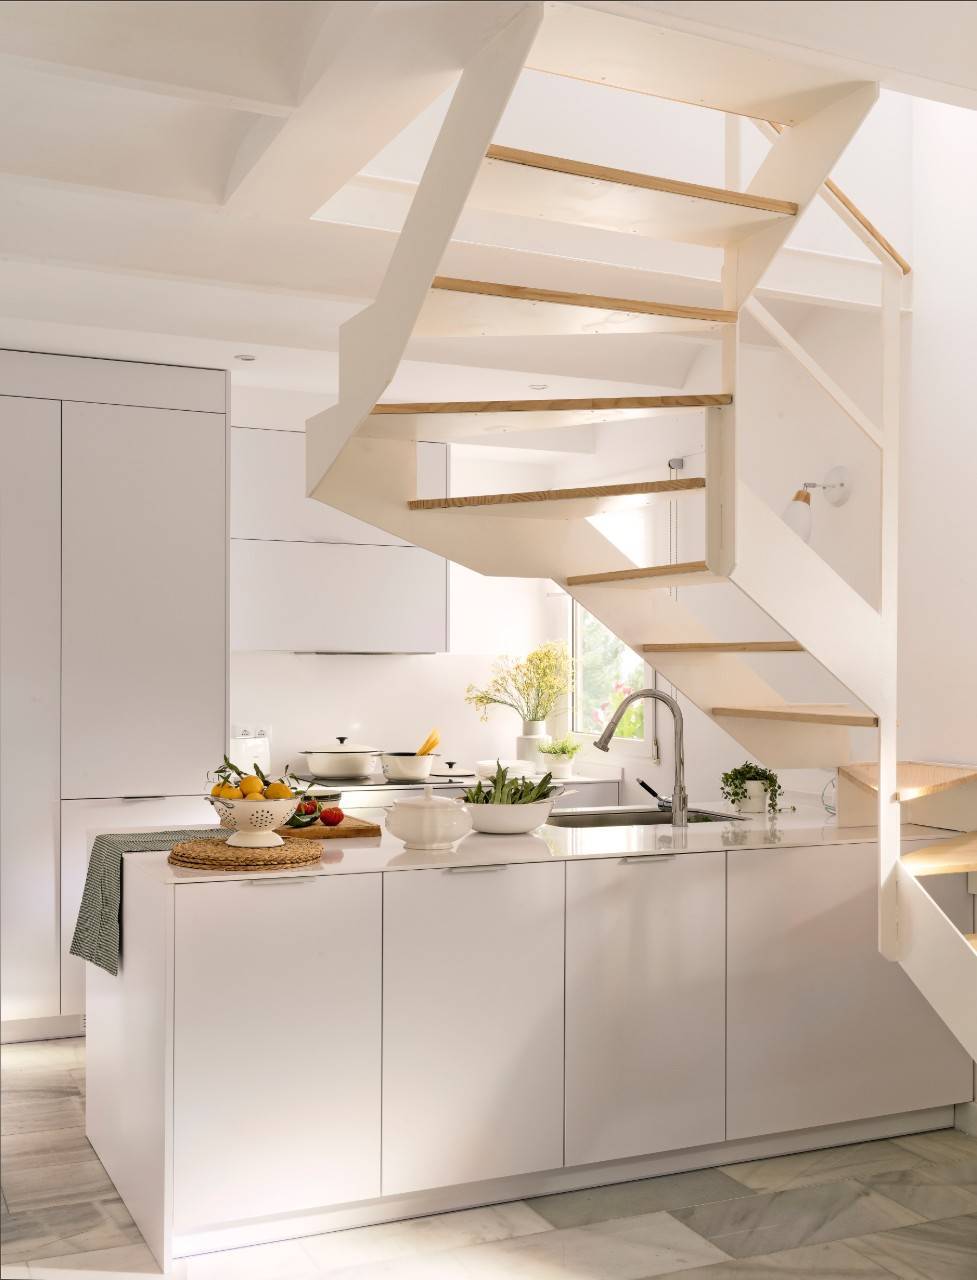 A MINI KITCHEN UNDER THE STAIRS